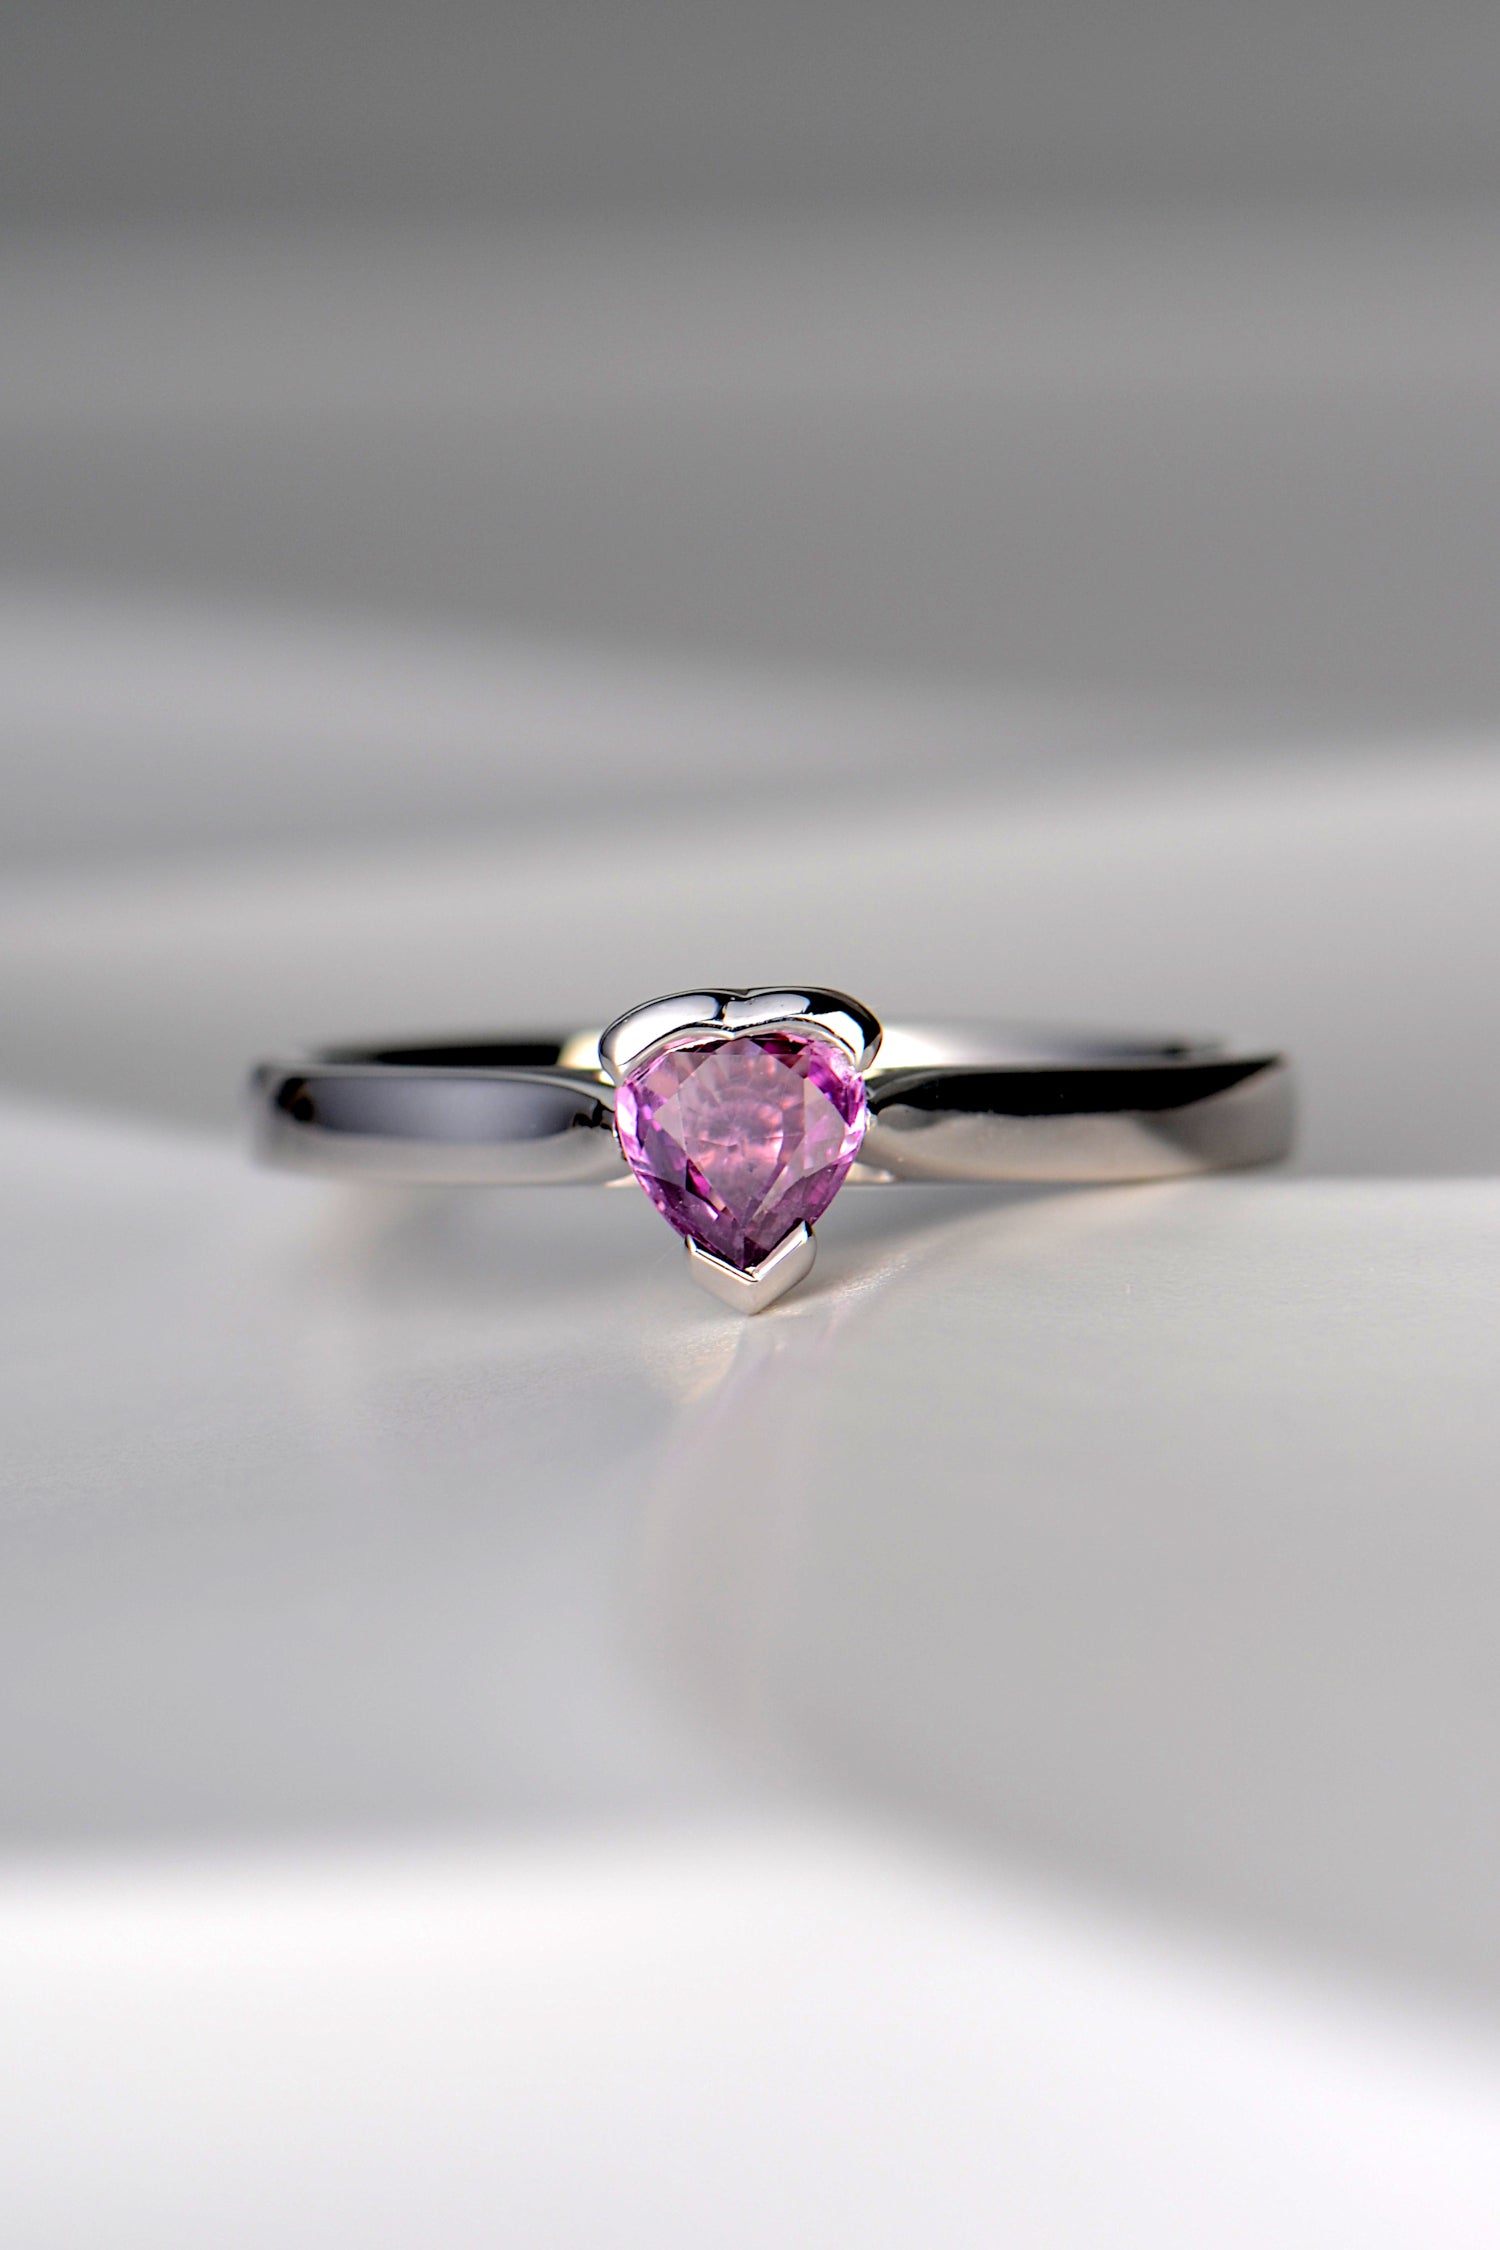 white gold ring with heart shaped pink sapphire in centre